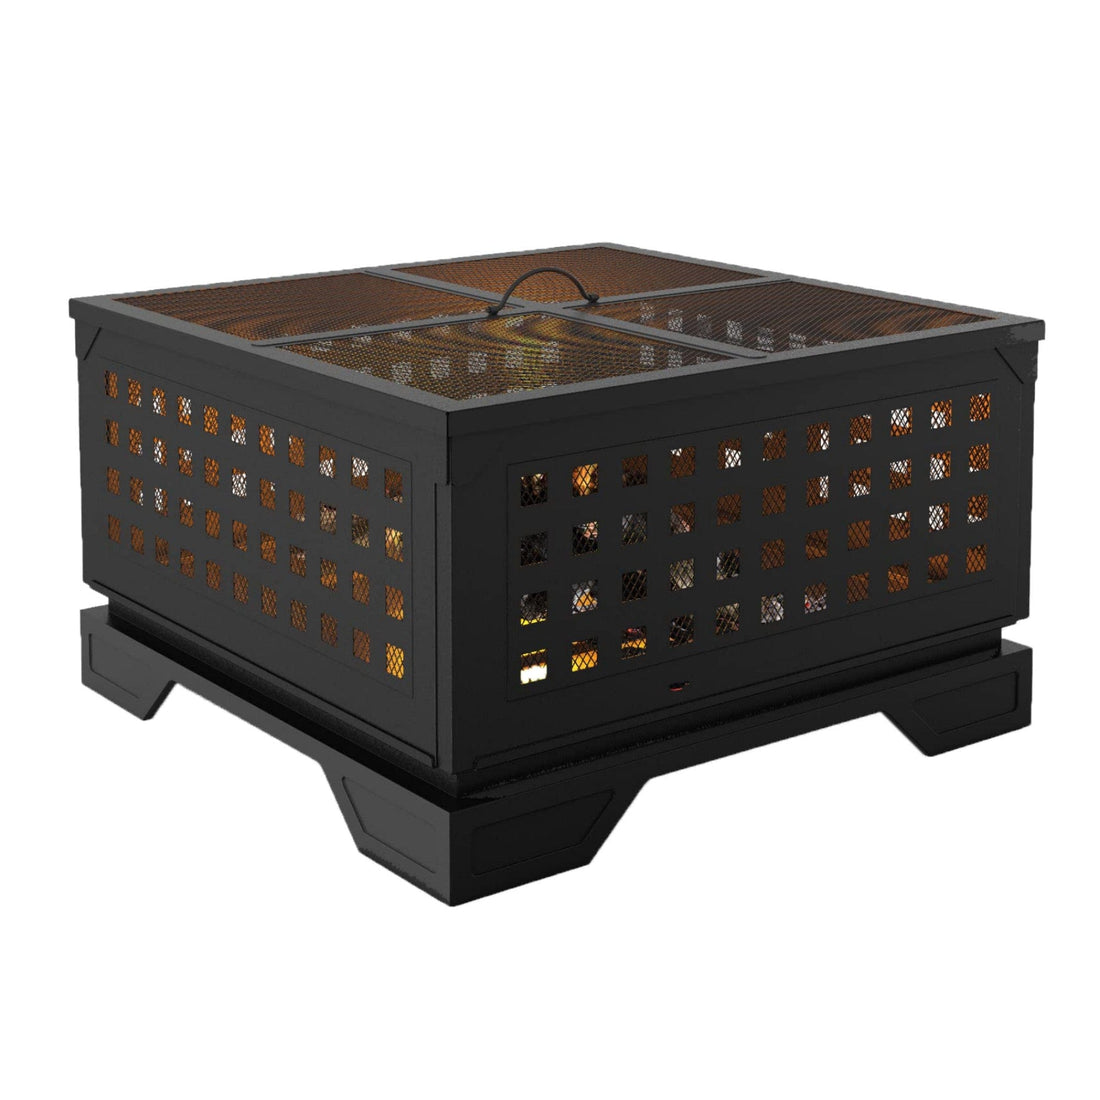 21.7 Inch Square Wood Burning Fire Pit with Spark Screen